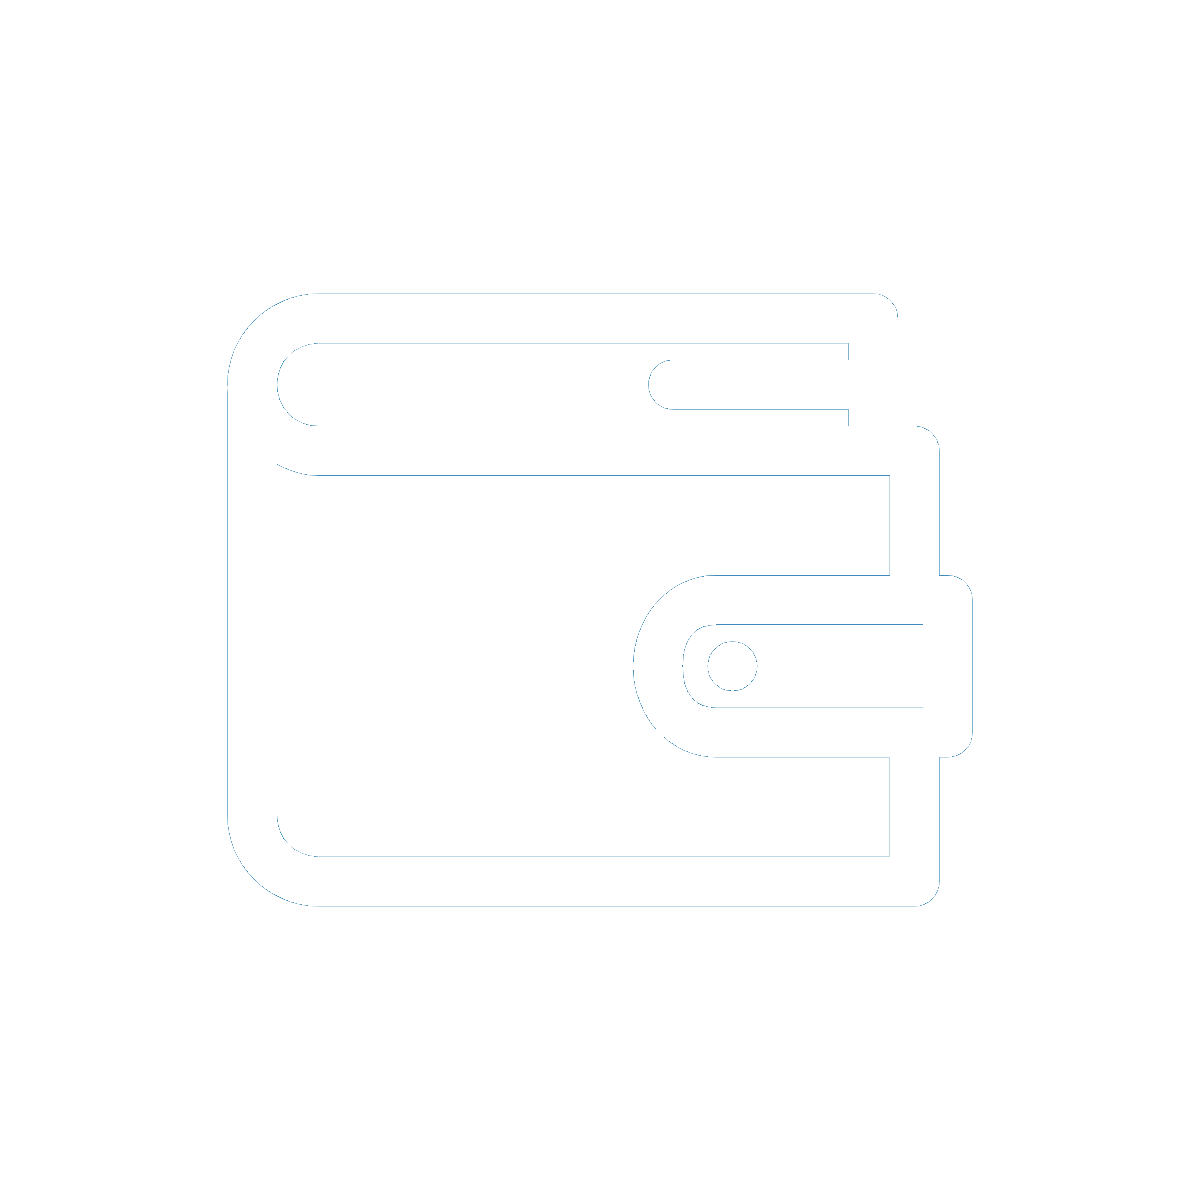 Icon of a closed wallet.